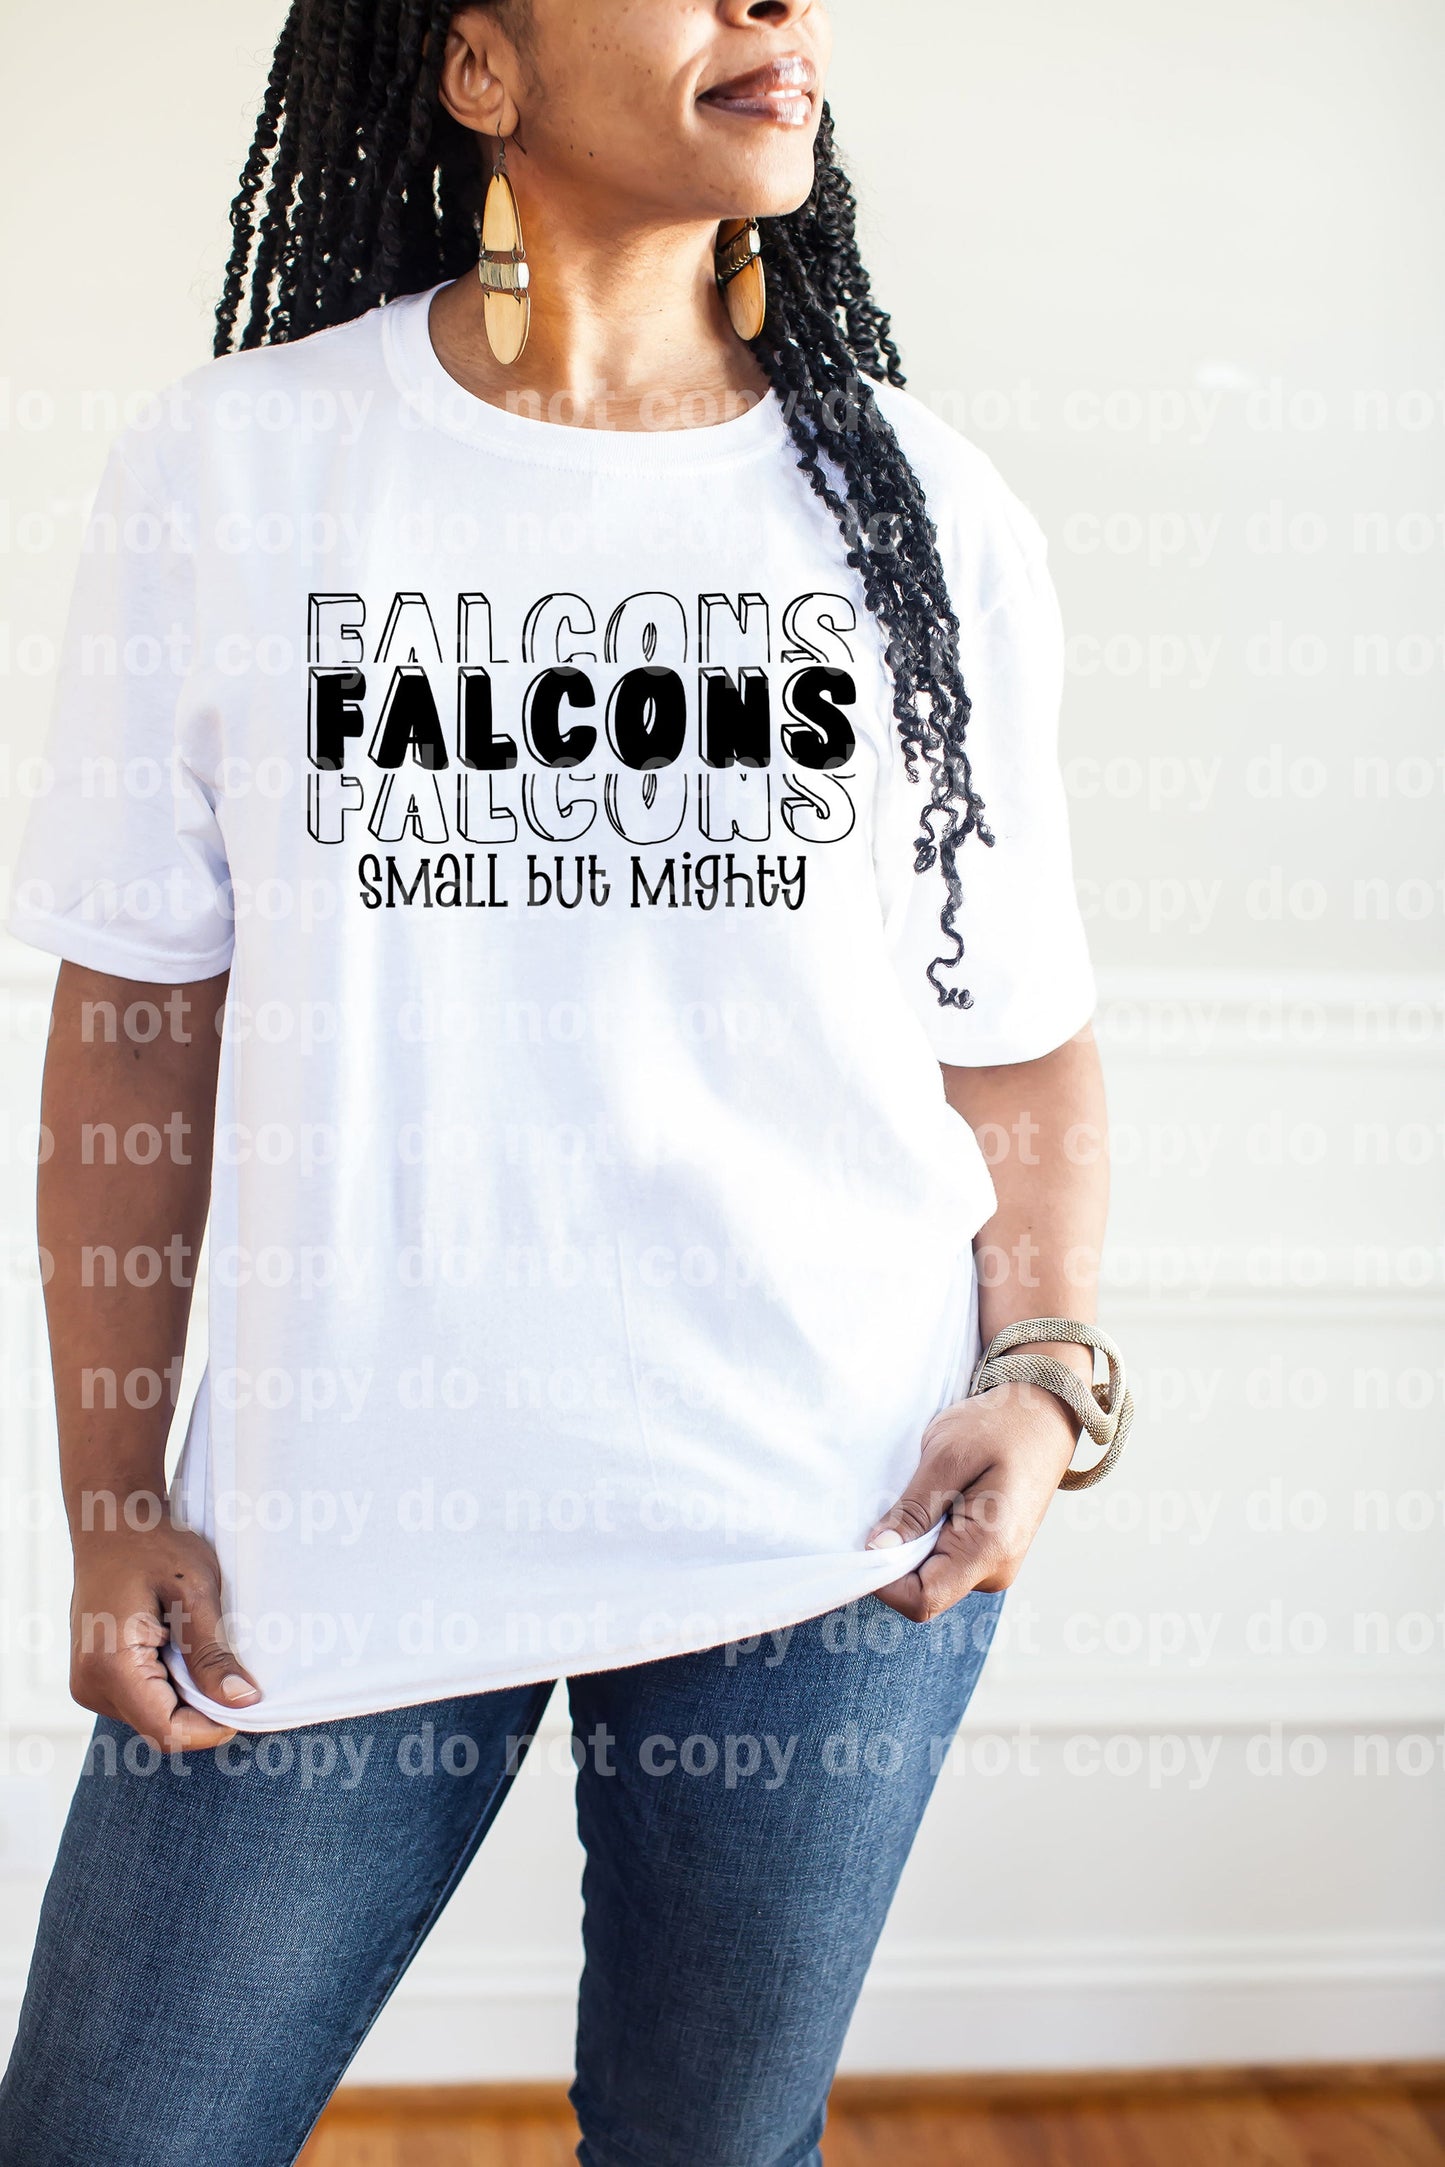 Falcons Small But Mighty Black/White Dream Print or Sublimation Print